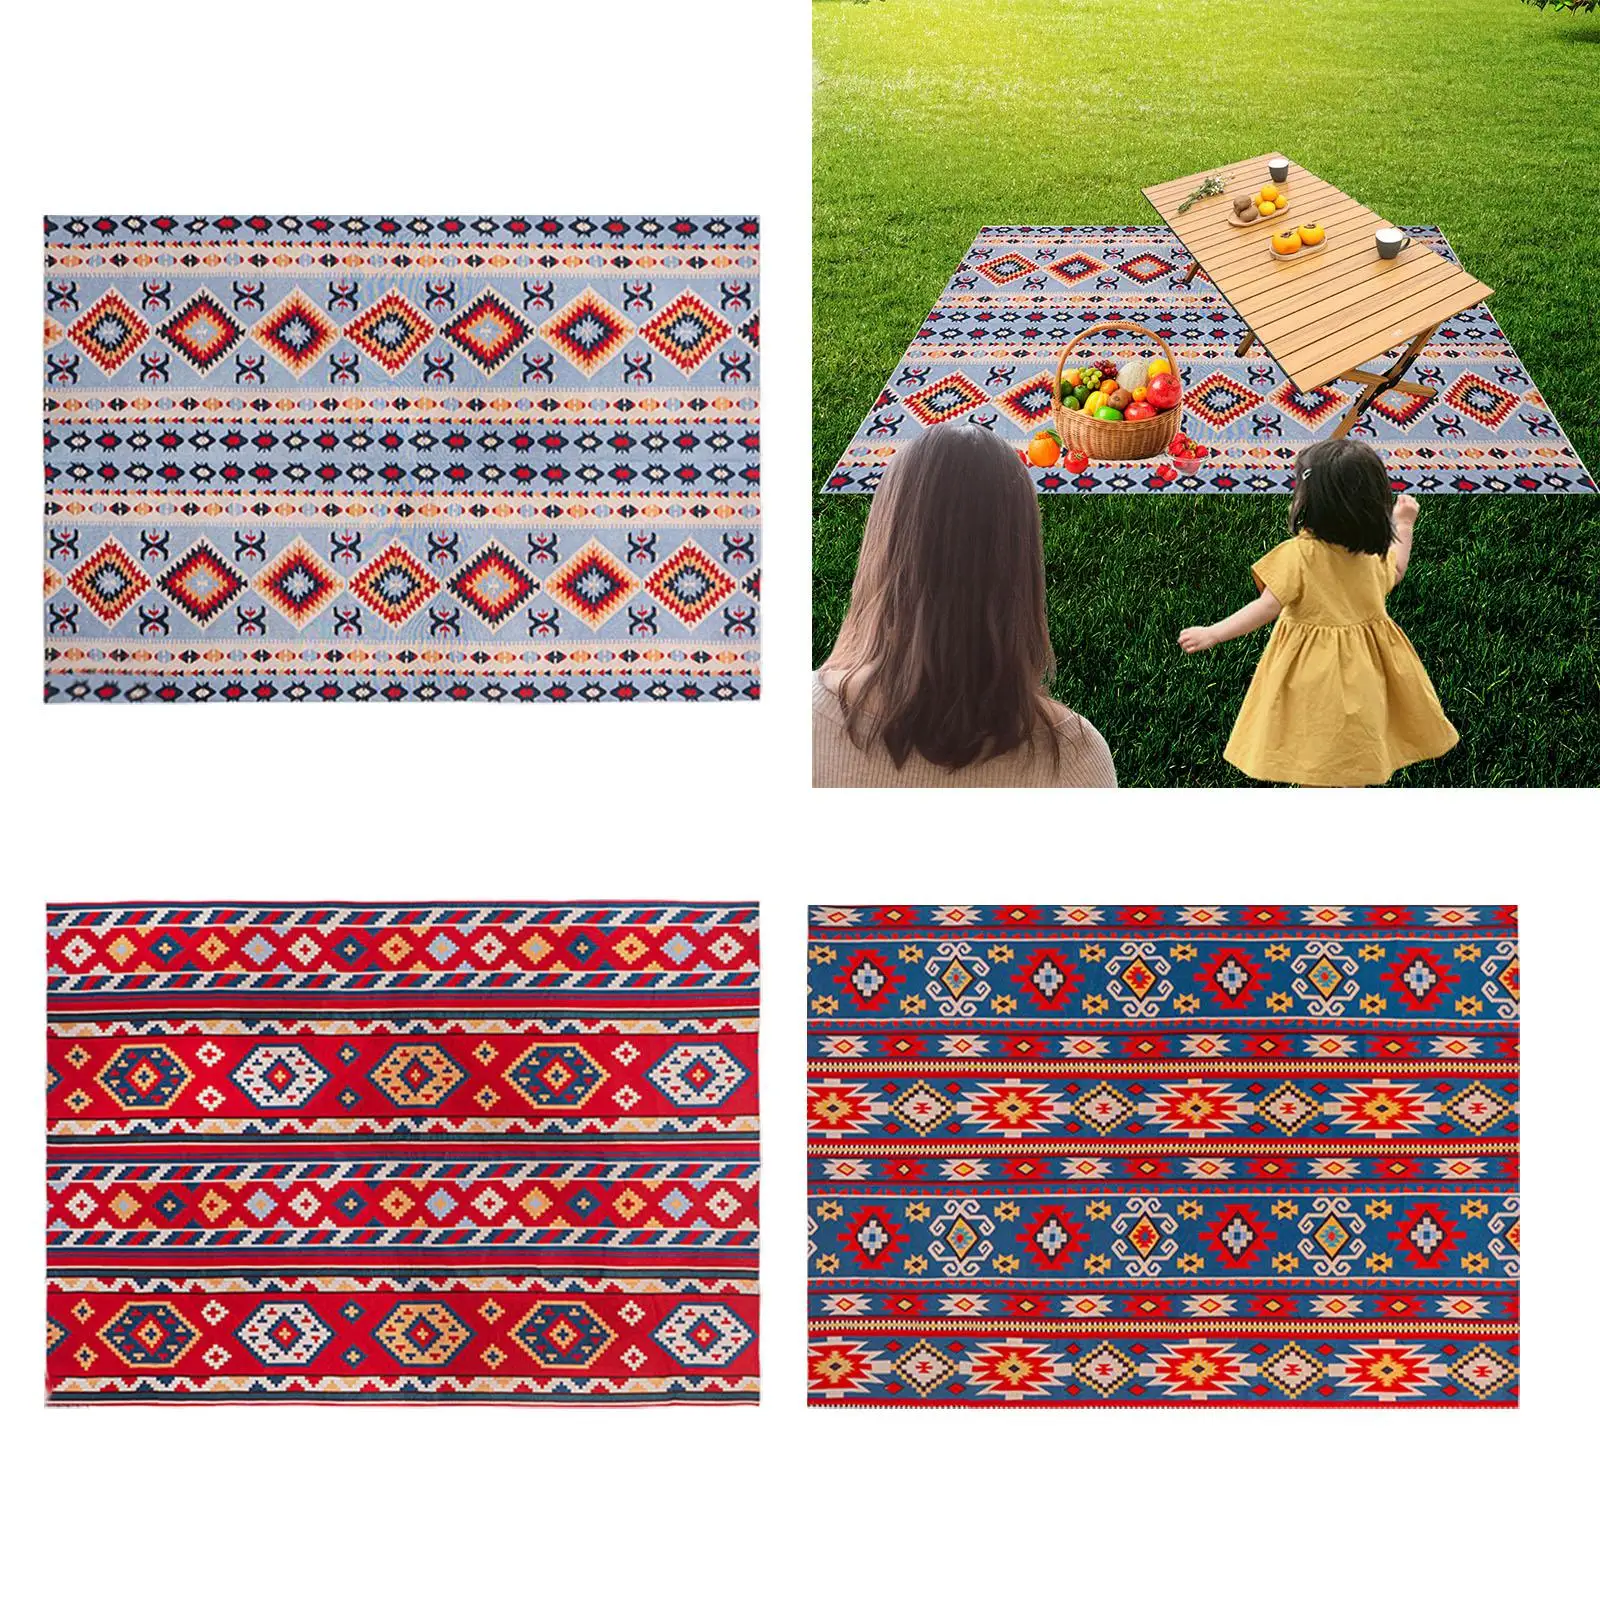 Large Picnic Outdoor Blanket Foldable Outdoor Moistureproof Outdoor Mat Camping Blanket for Grass Beach Travel Hiking